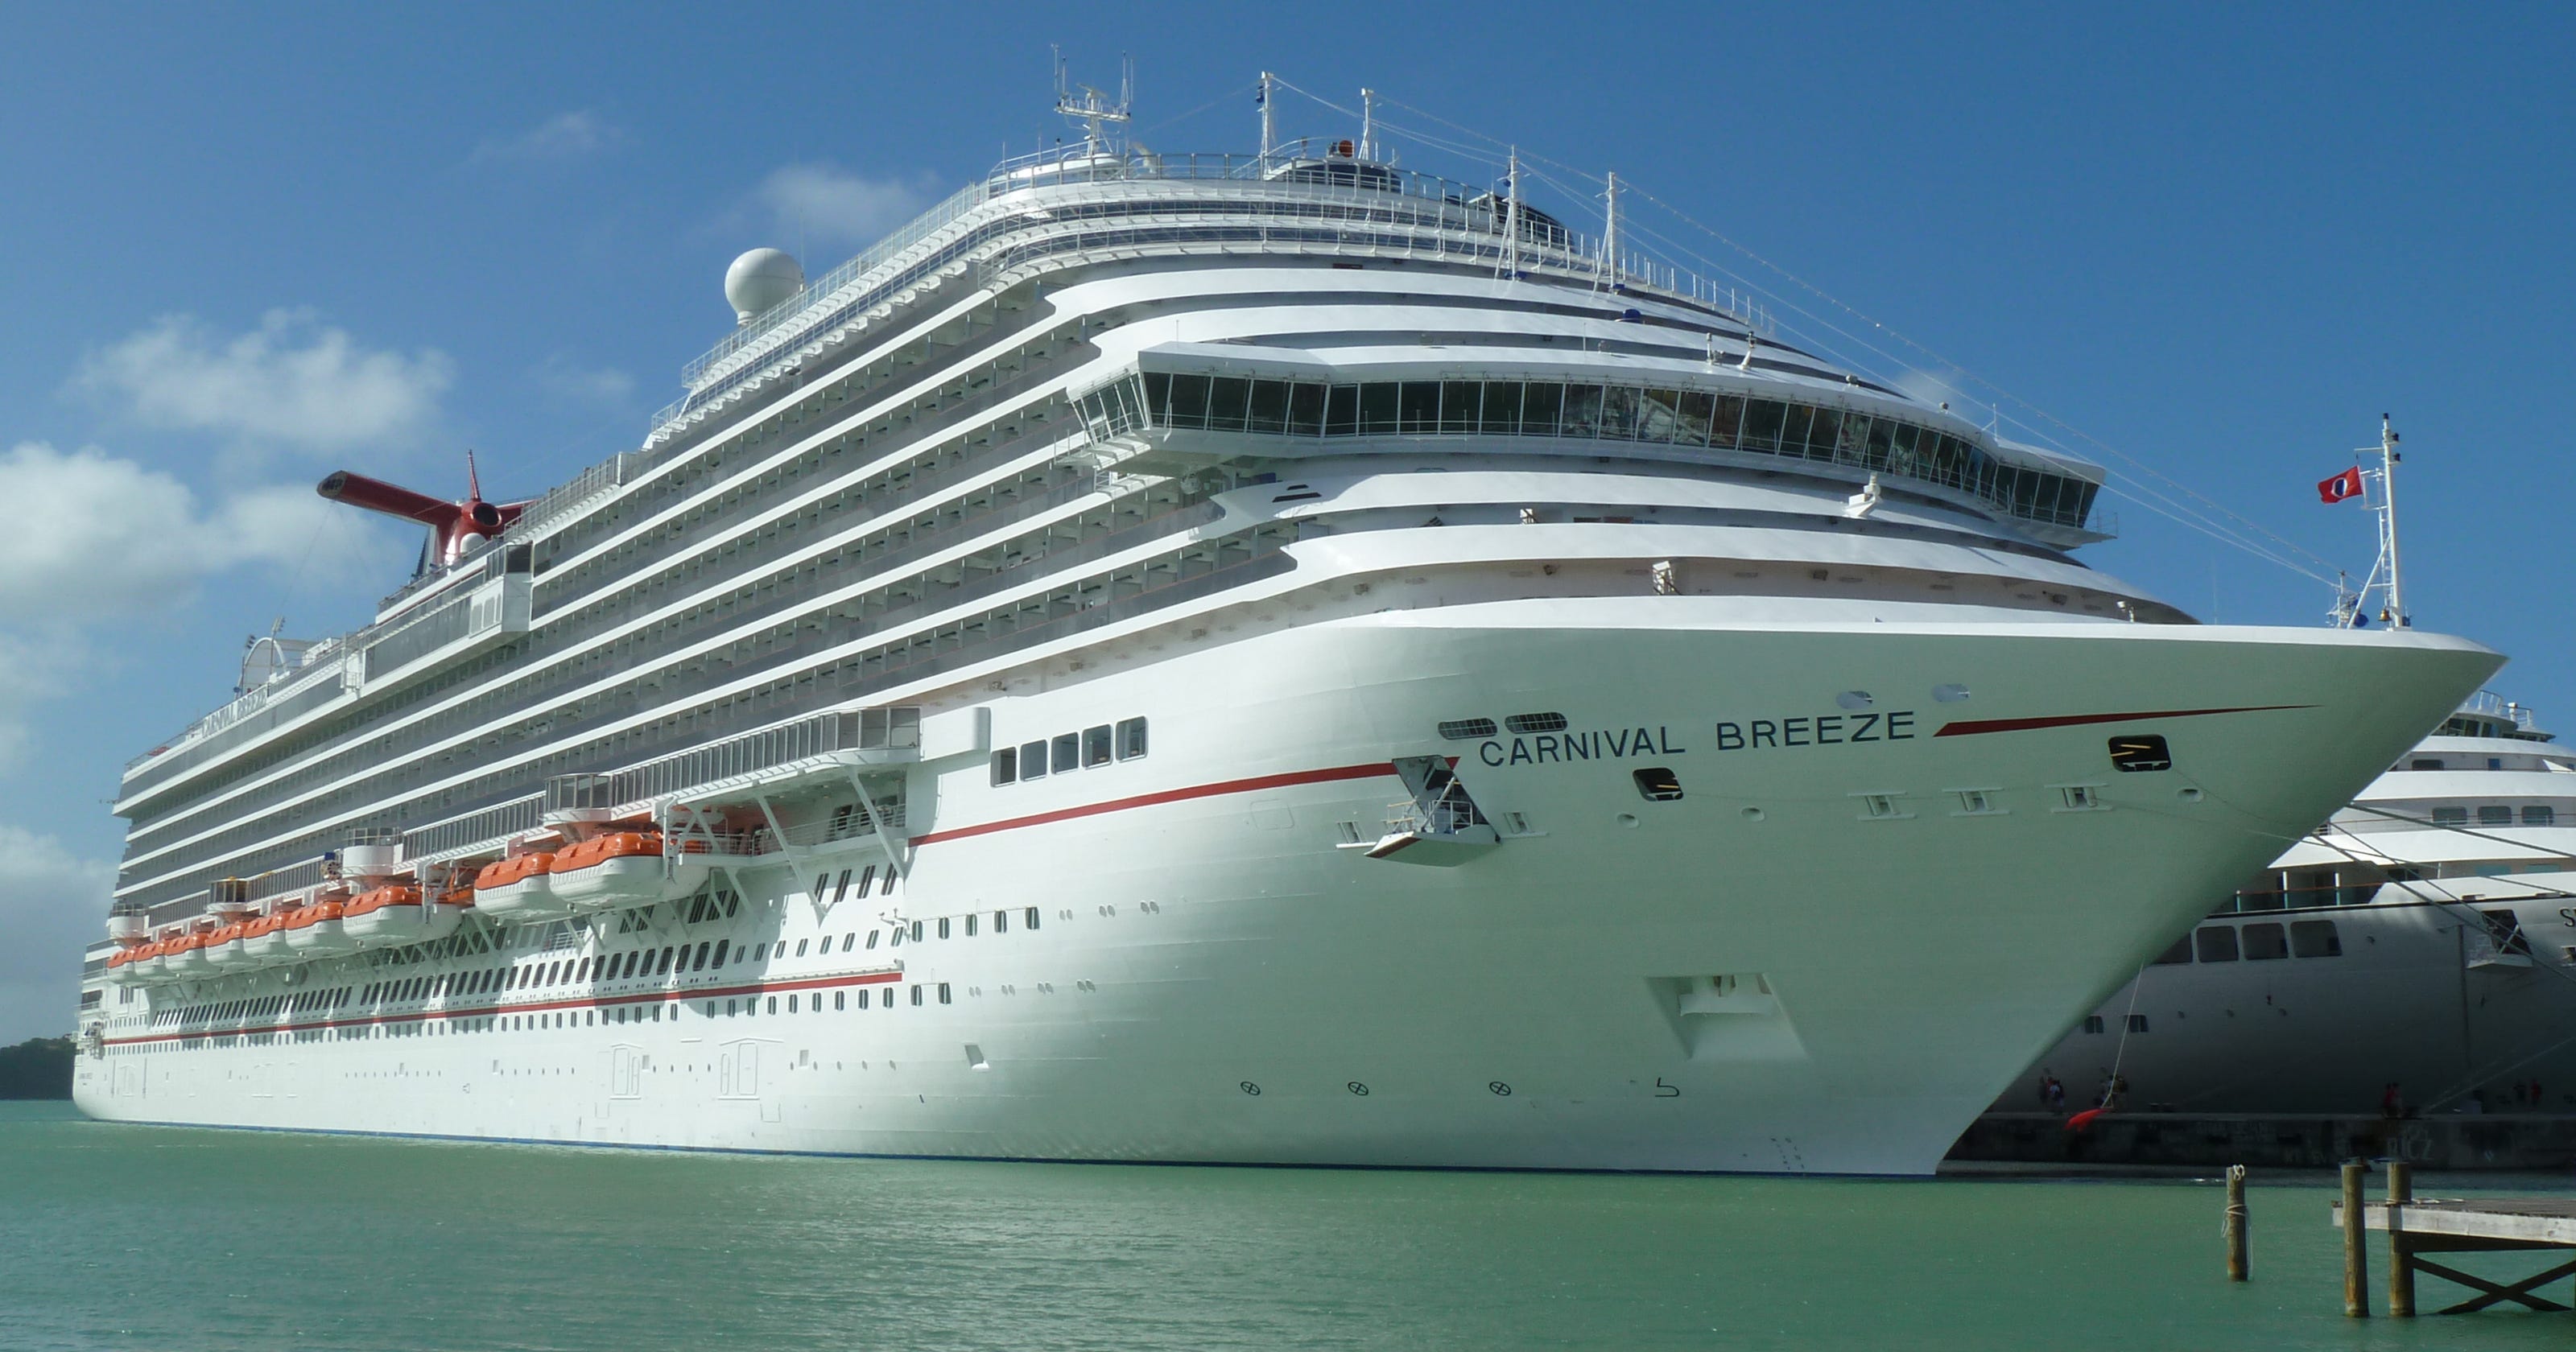 location of the carnival breeze cruise ship